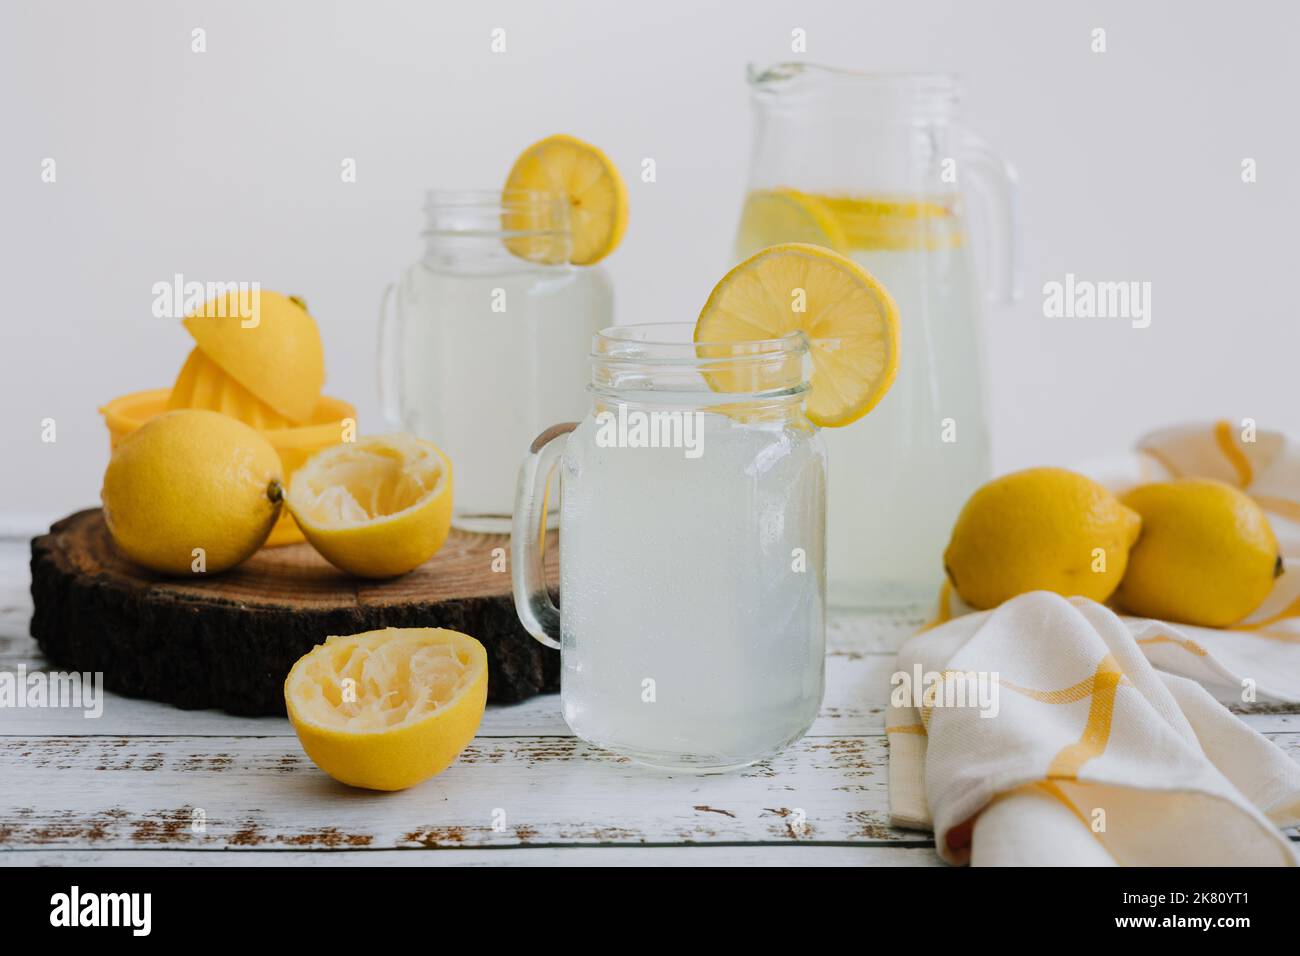 Jar glass of lemonade drink with yellow lemons or lime on a white background in Latin America Stock Photo